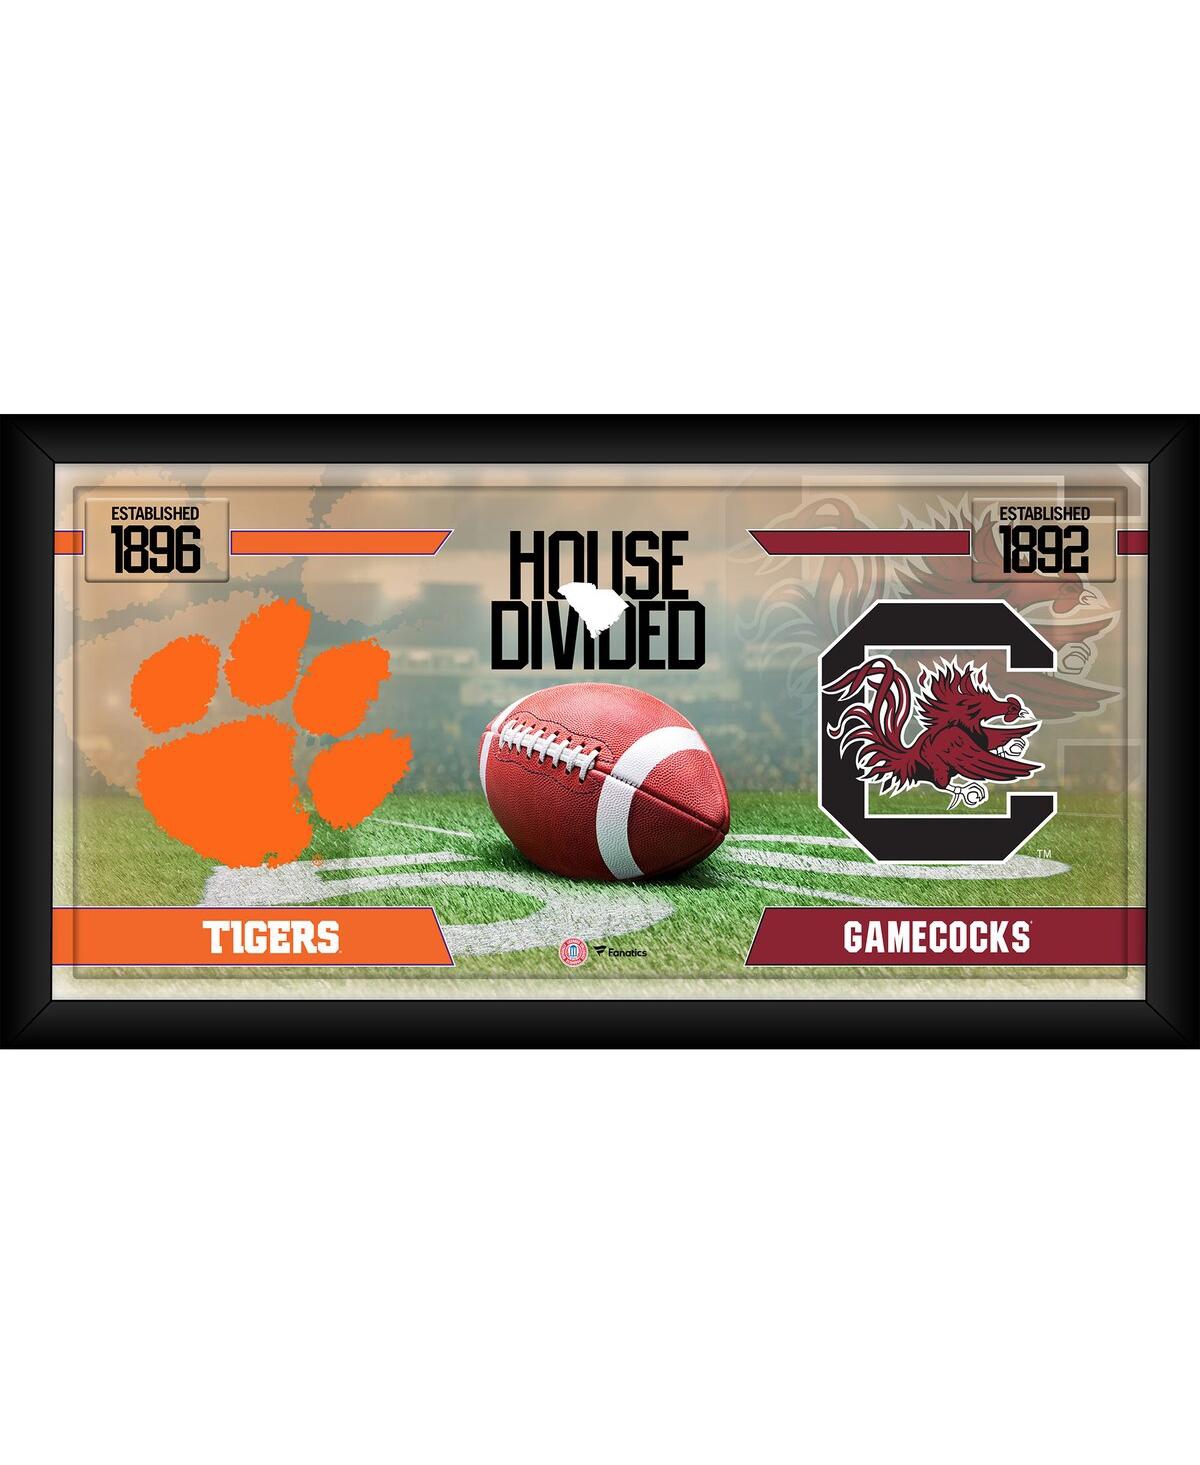 Fanatics Authentic Clemson Tigers Vs. South Carolina Gamecocks Framed 10" X 20" House Divided Football Collage In Multi